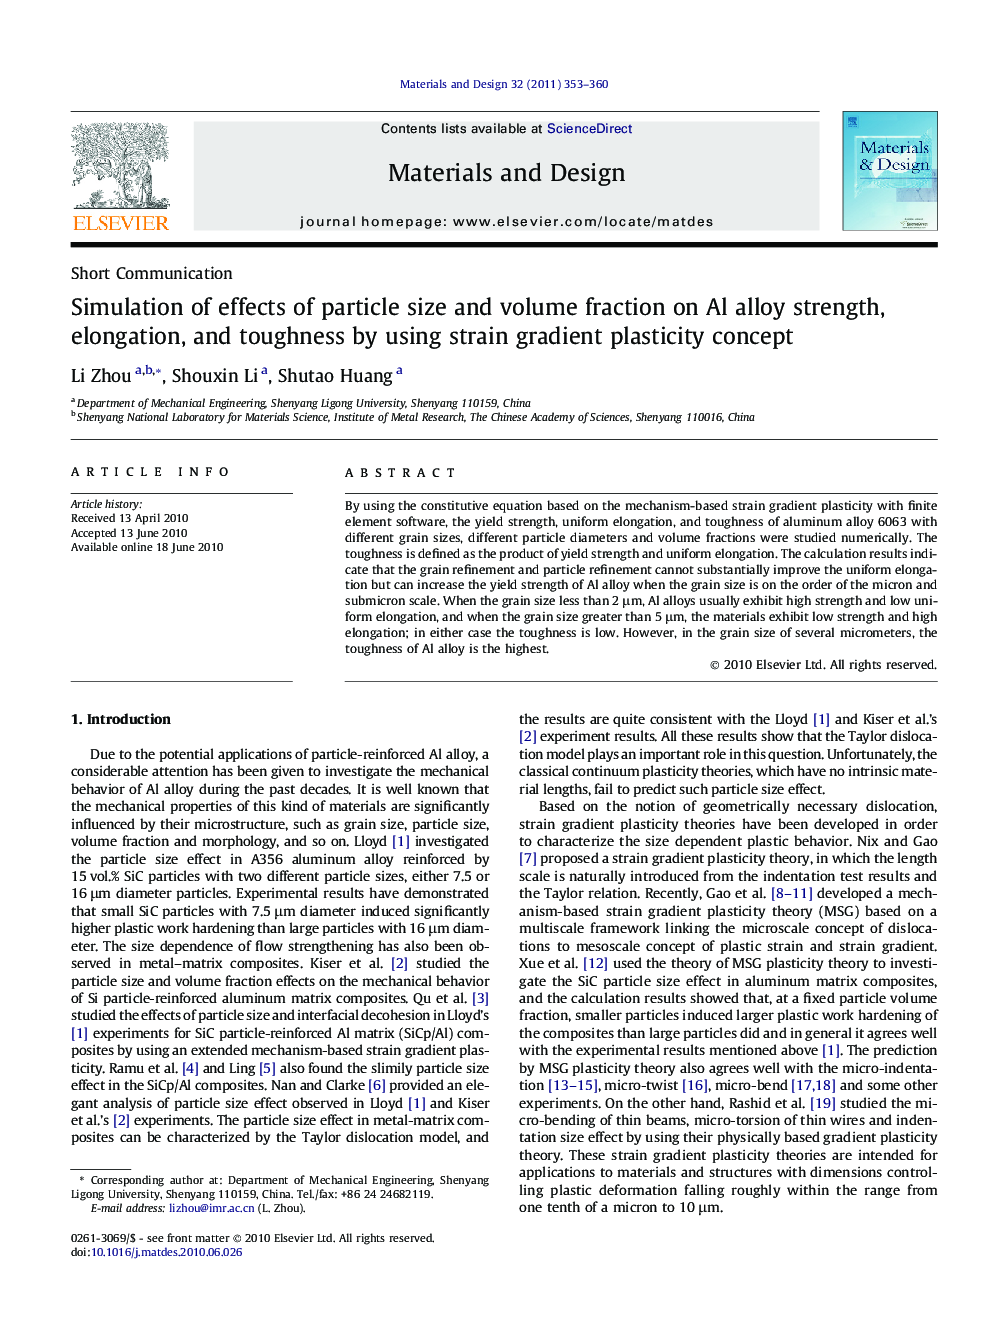 Simulation of effects of particle size and volume fraction on Al alloy strength, elongation, and toughness by using strain gradient plasticity concept